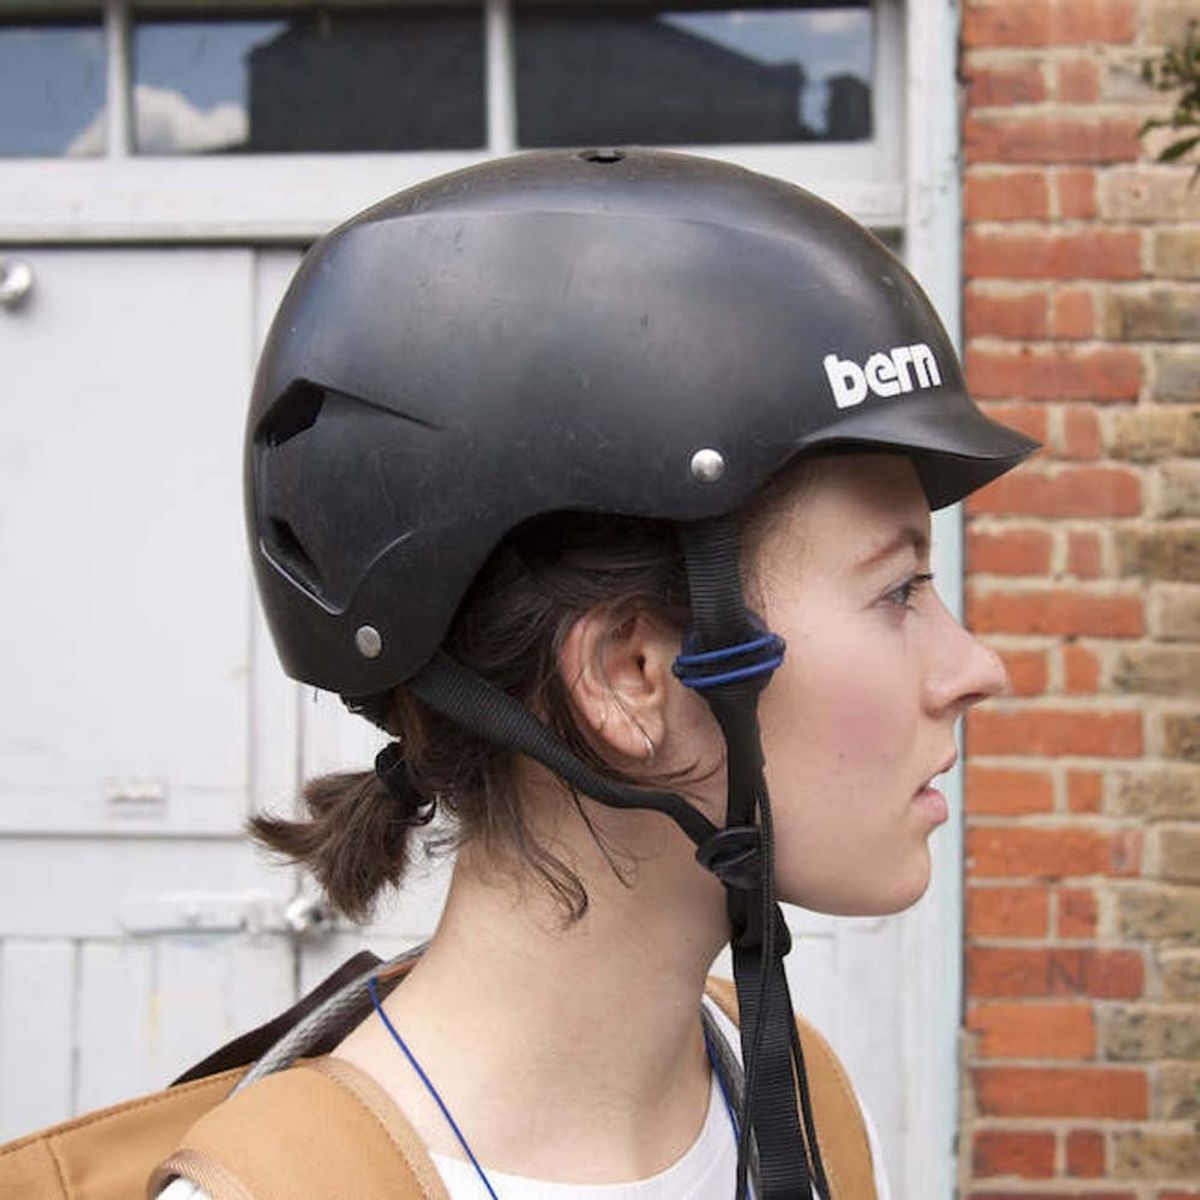 This Headphone Helmet Will Play Music Safely While You Bike